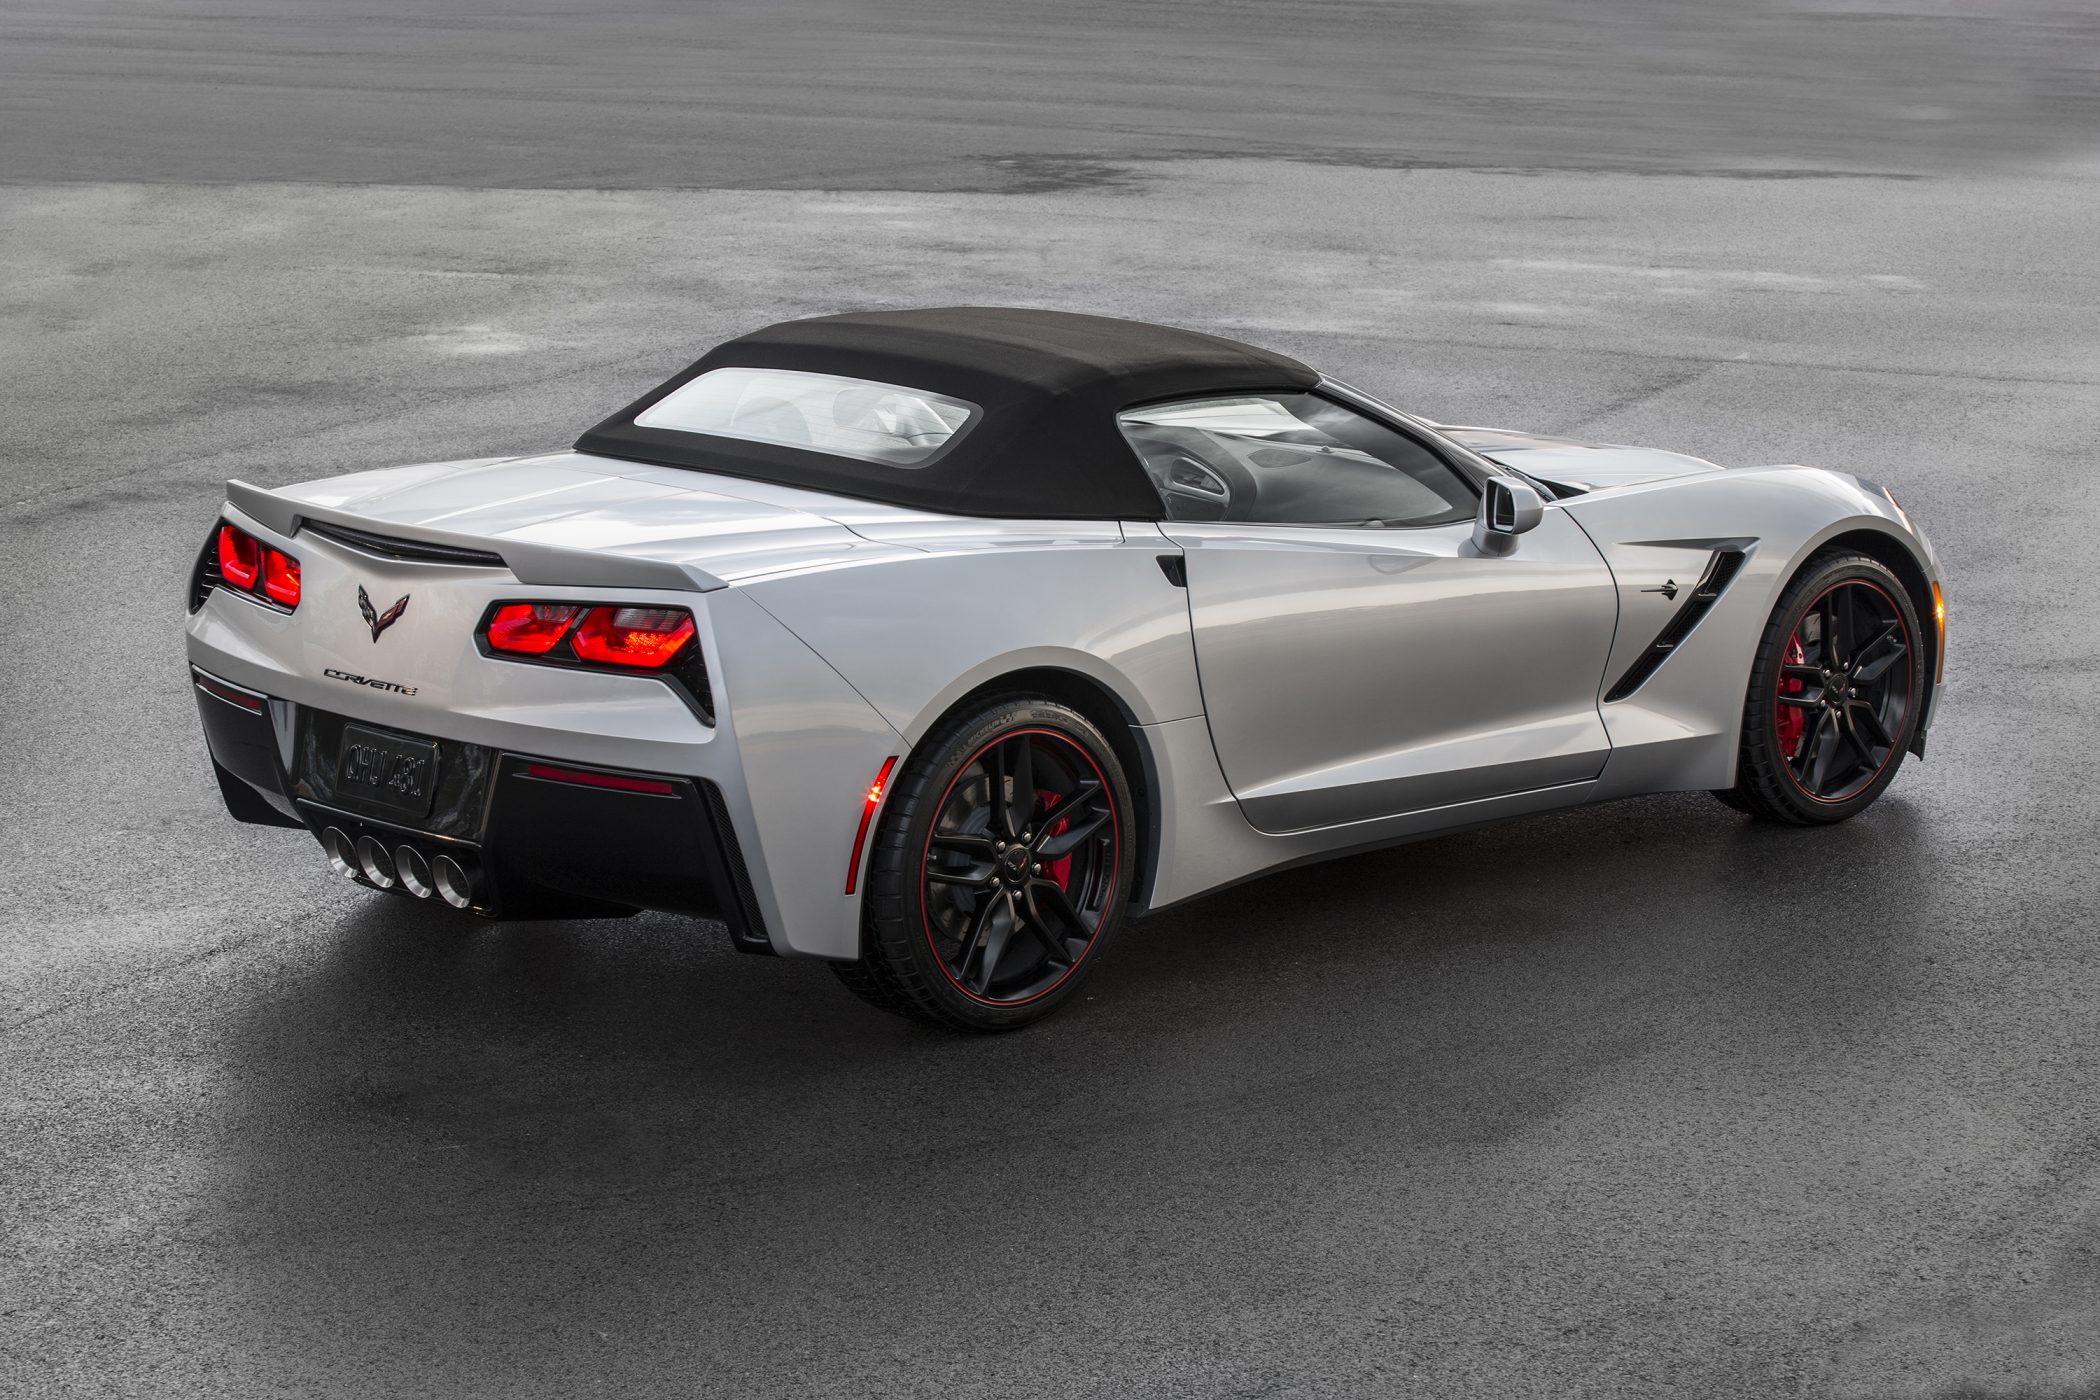 <strong>Best Convertible:</strong> The <a href="http://www.edmunds.com/chevrolet/corvette/2016/" target="_blank">Chevrolet Corvette</a>—named best non-luxury convertible for retained value four of six times since 2011—may have a near-luxury price tag at $60,280. That said, it depreciates less than some of its luxury counterparts, losing 42% of its value over five years.